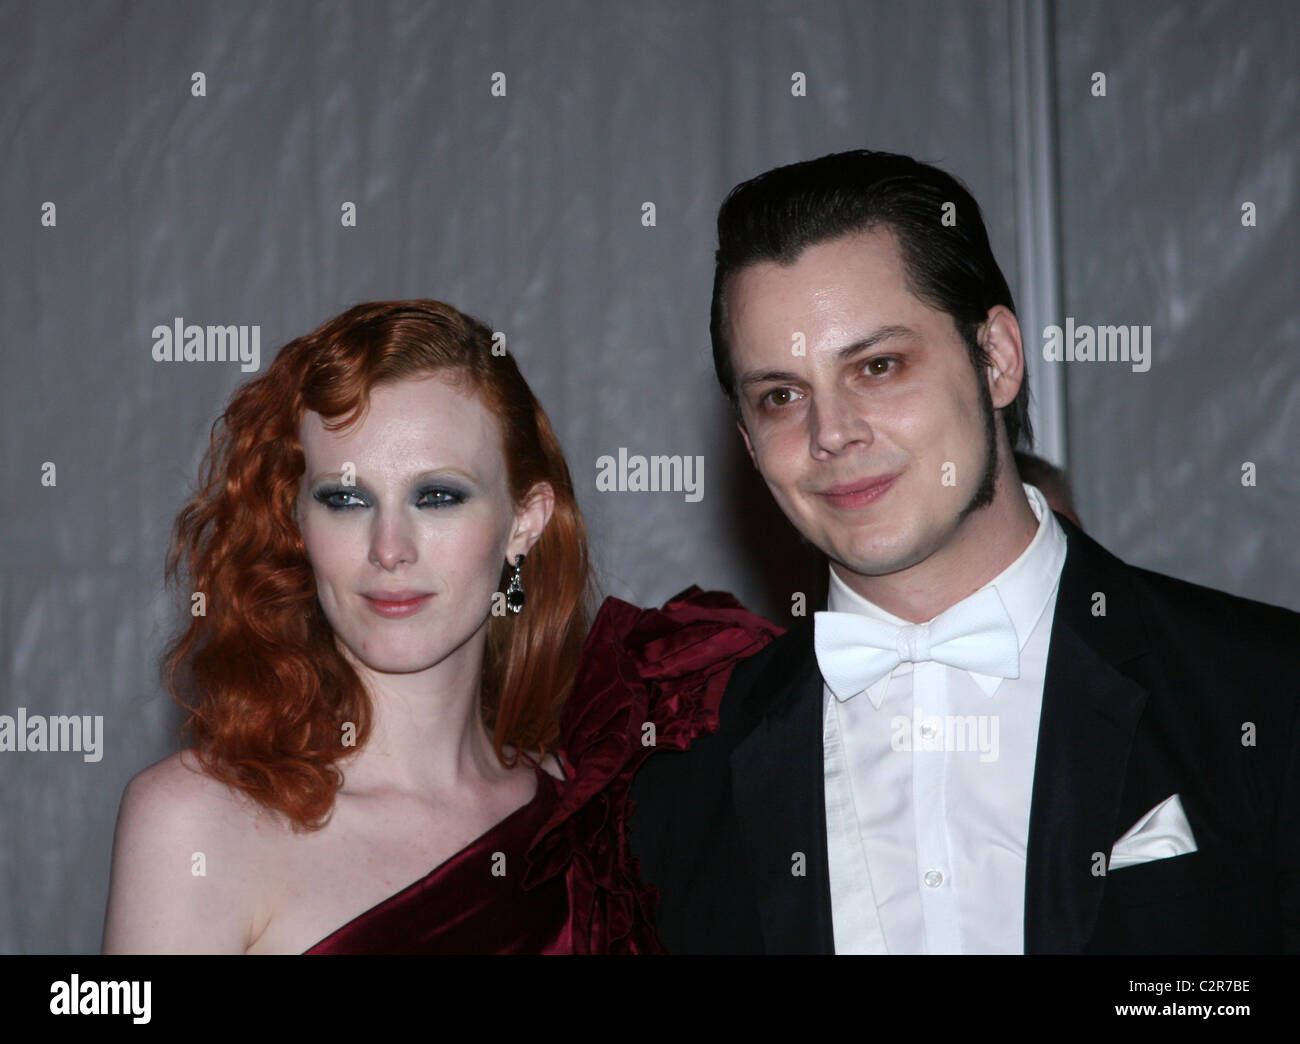 Karen Elson and Jack White 'Superheroes: Fashion and Fantasy' Costume Institute Gala at The Metropolitan Museum of Art - Stock Photo